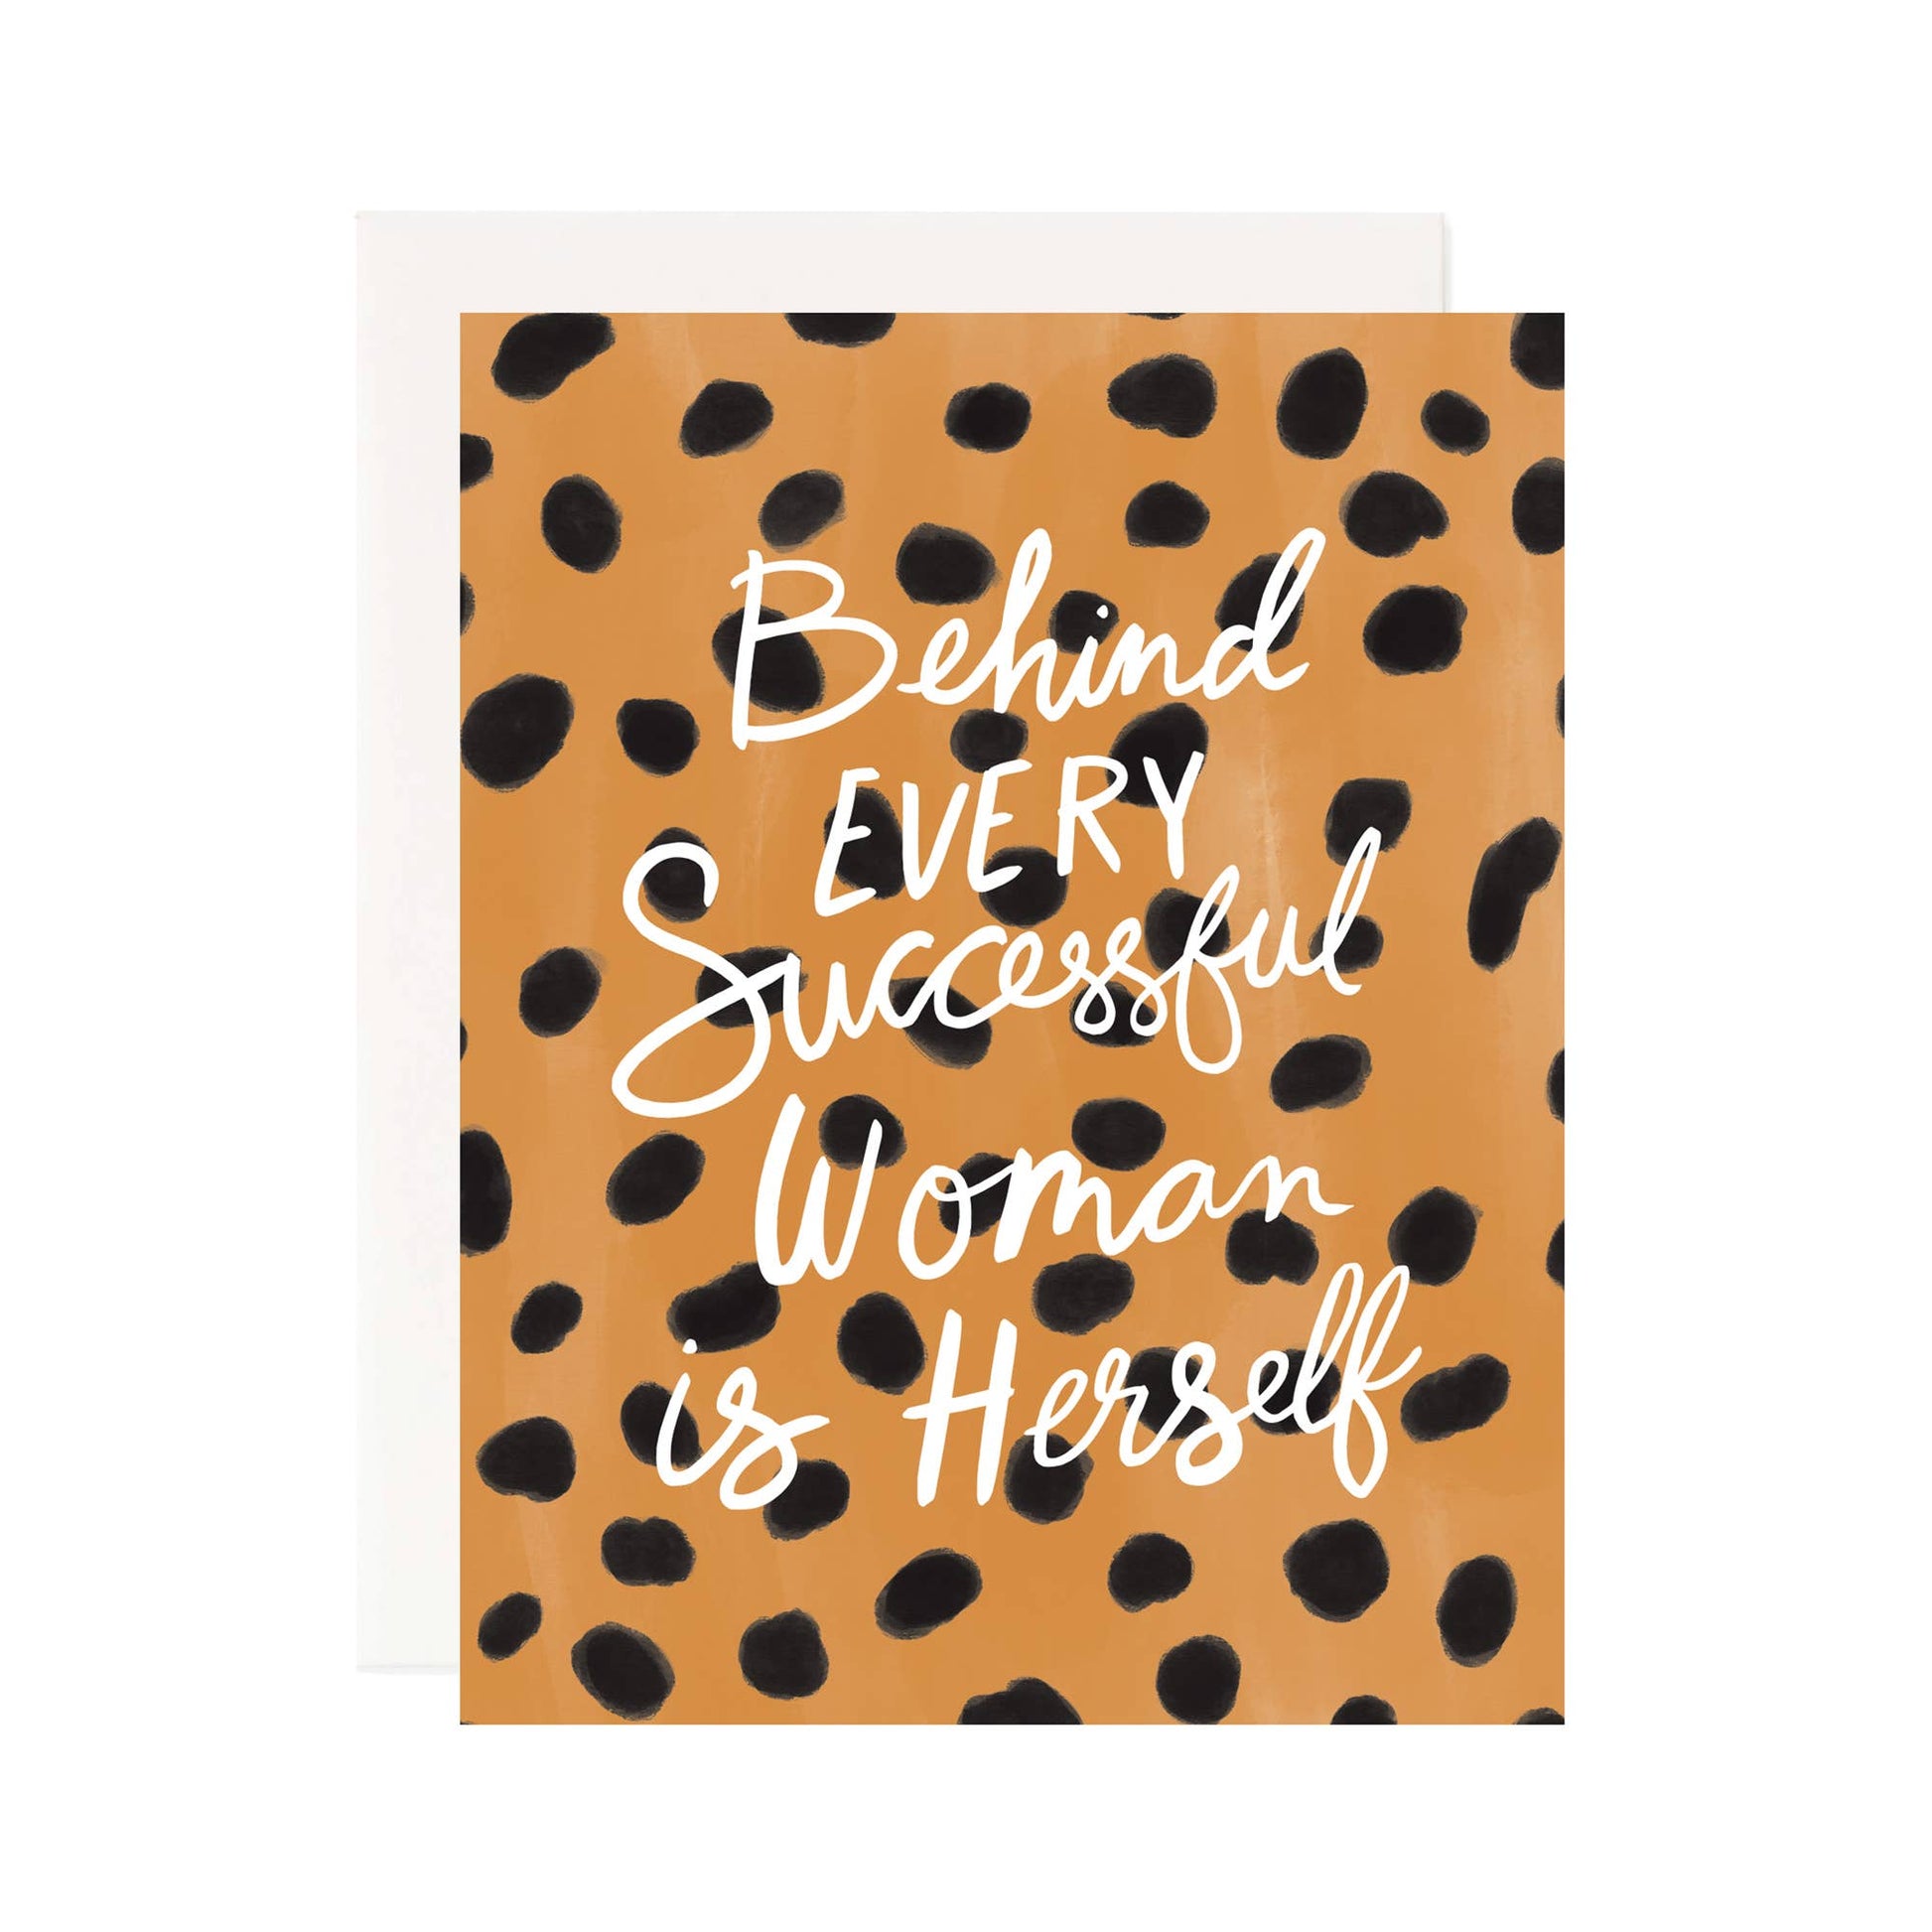 Behind every successful woman is herself. Greeting card text in white overlaying a cheetah print background.